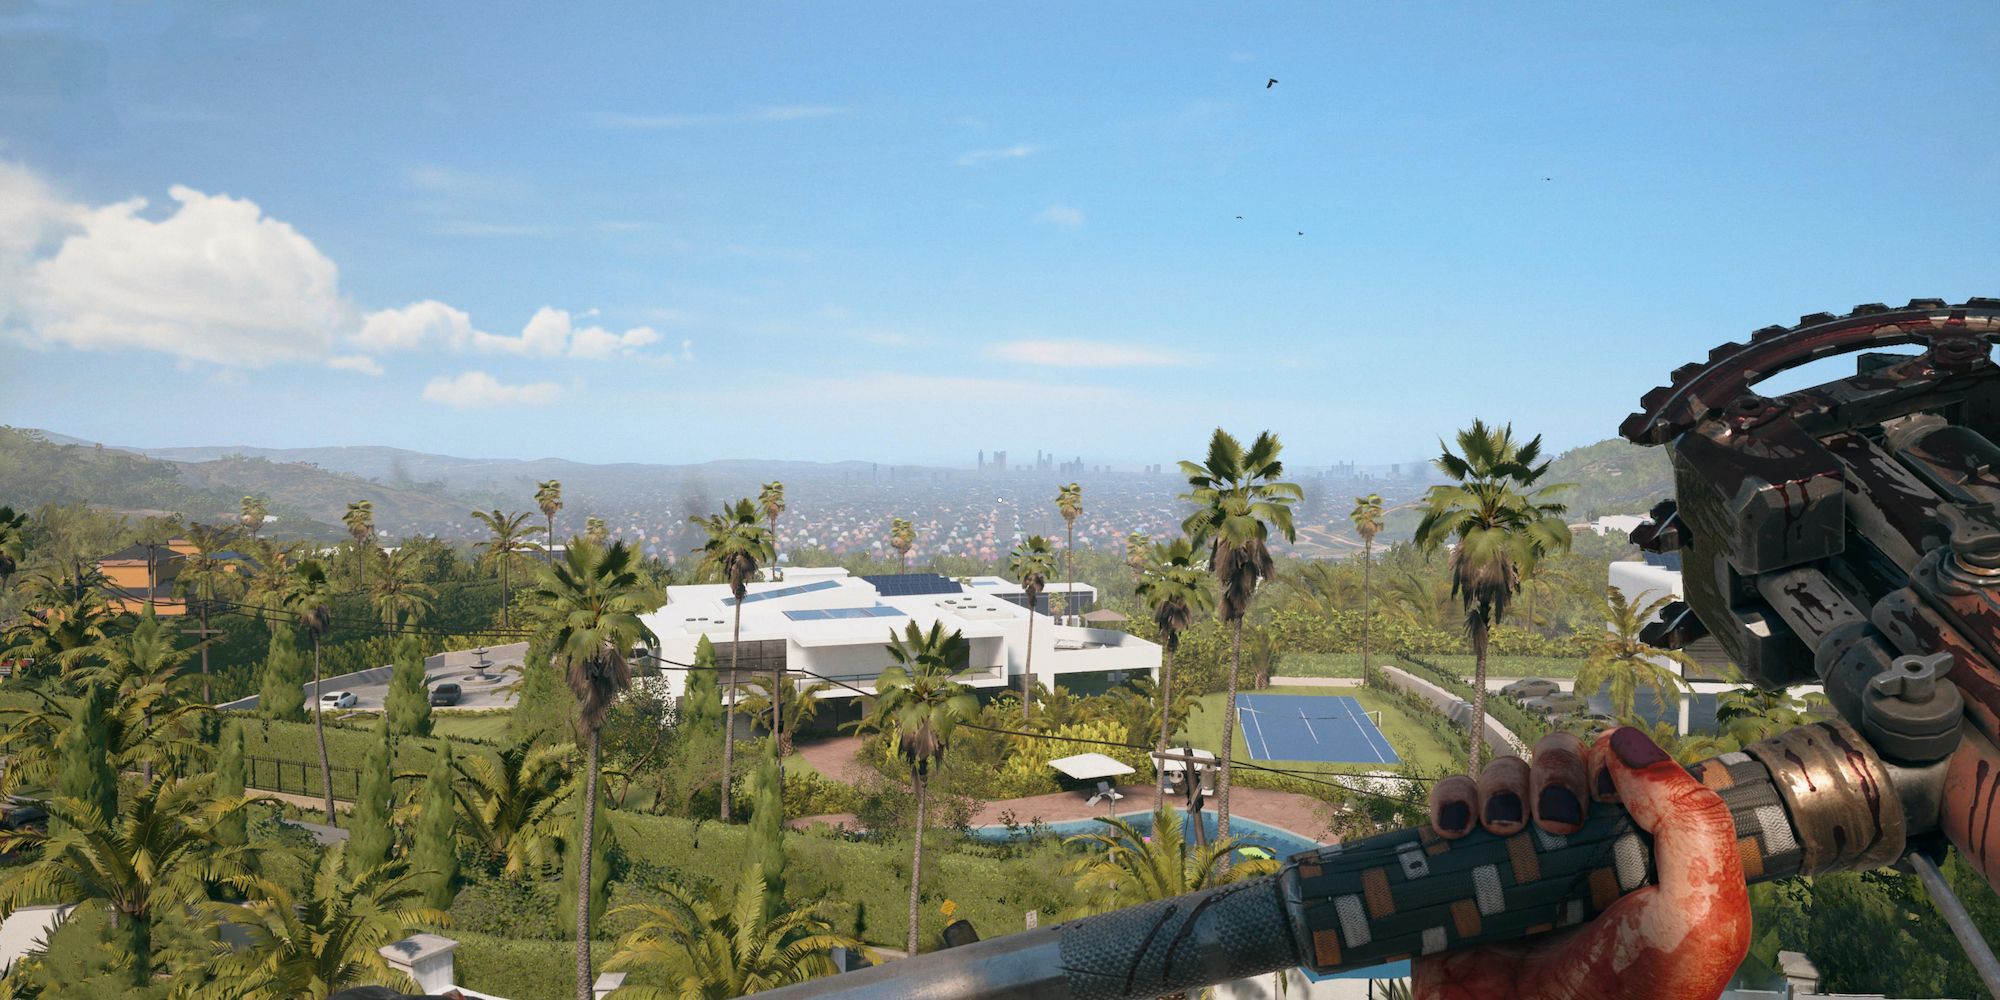 A view of downtown Los Angeles from the top of a Bel-Air building in Dead Island 2.